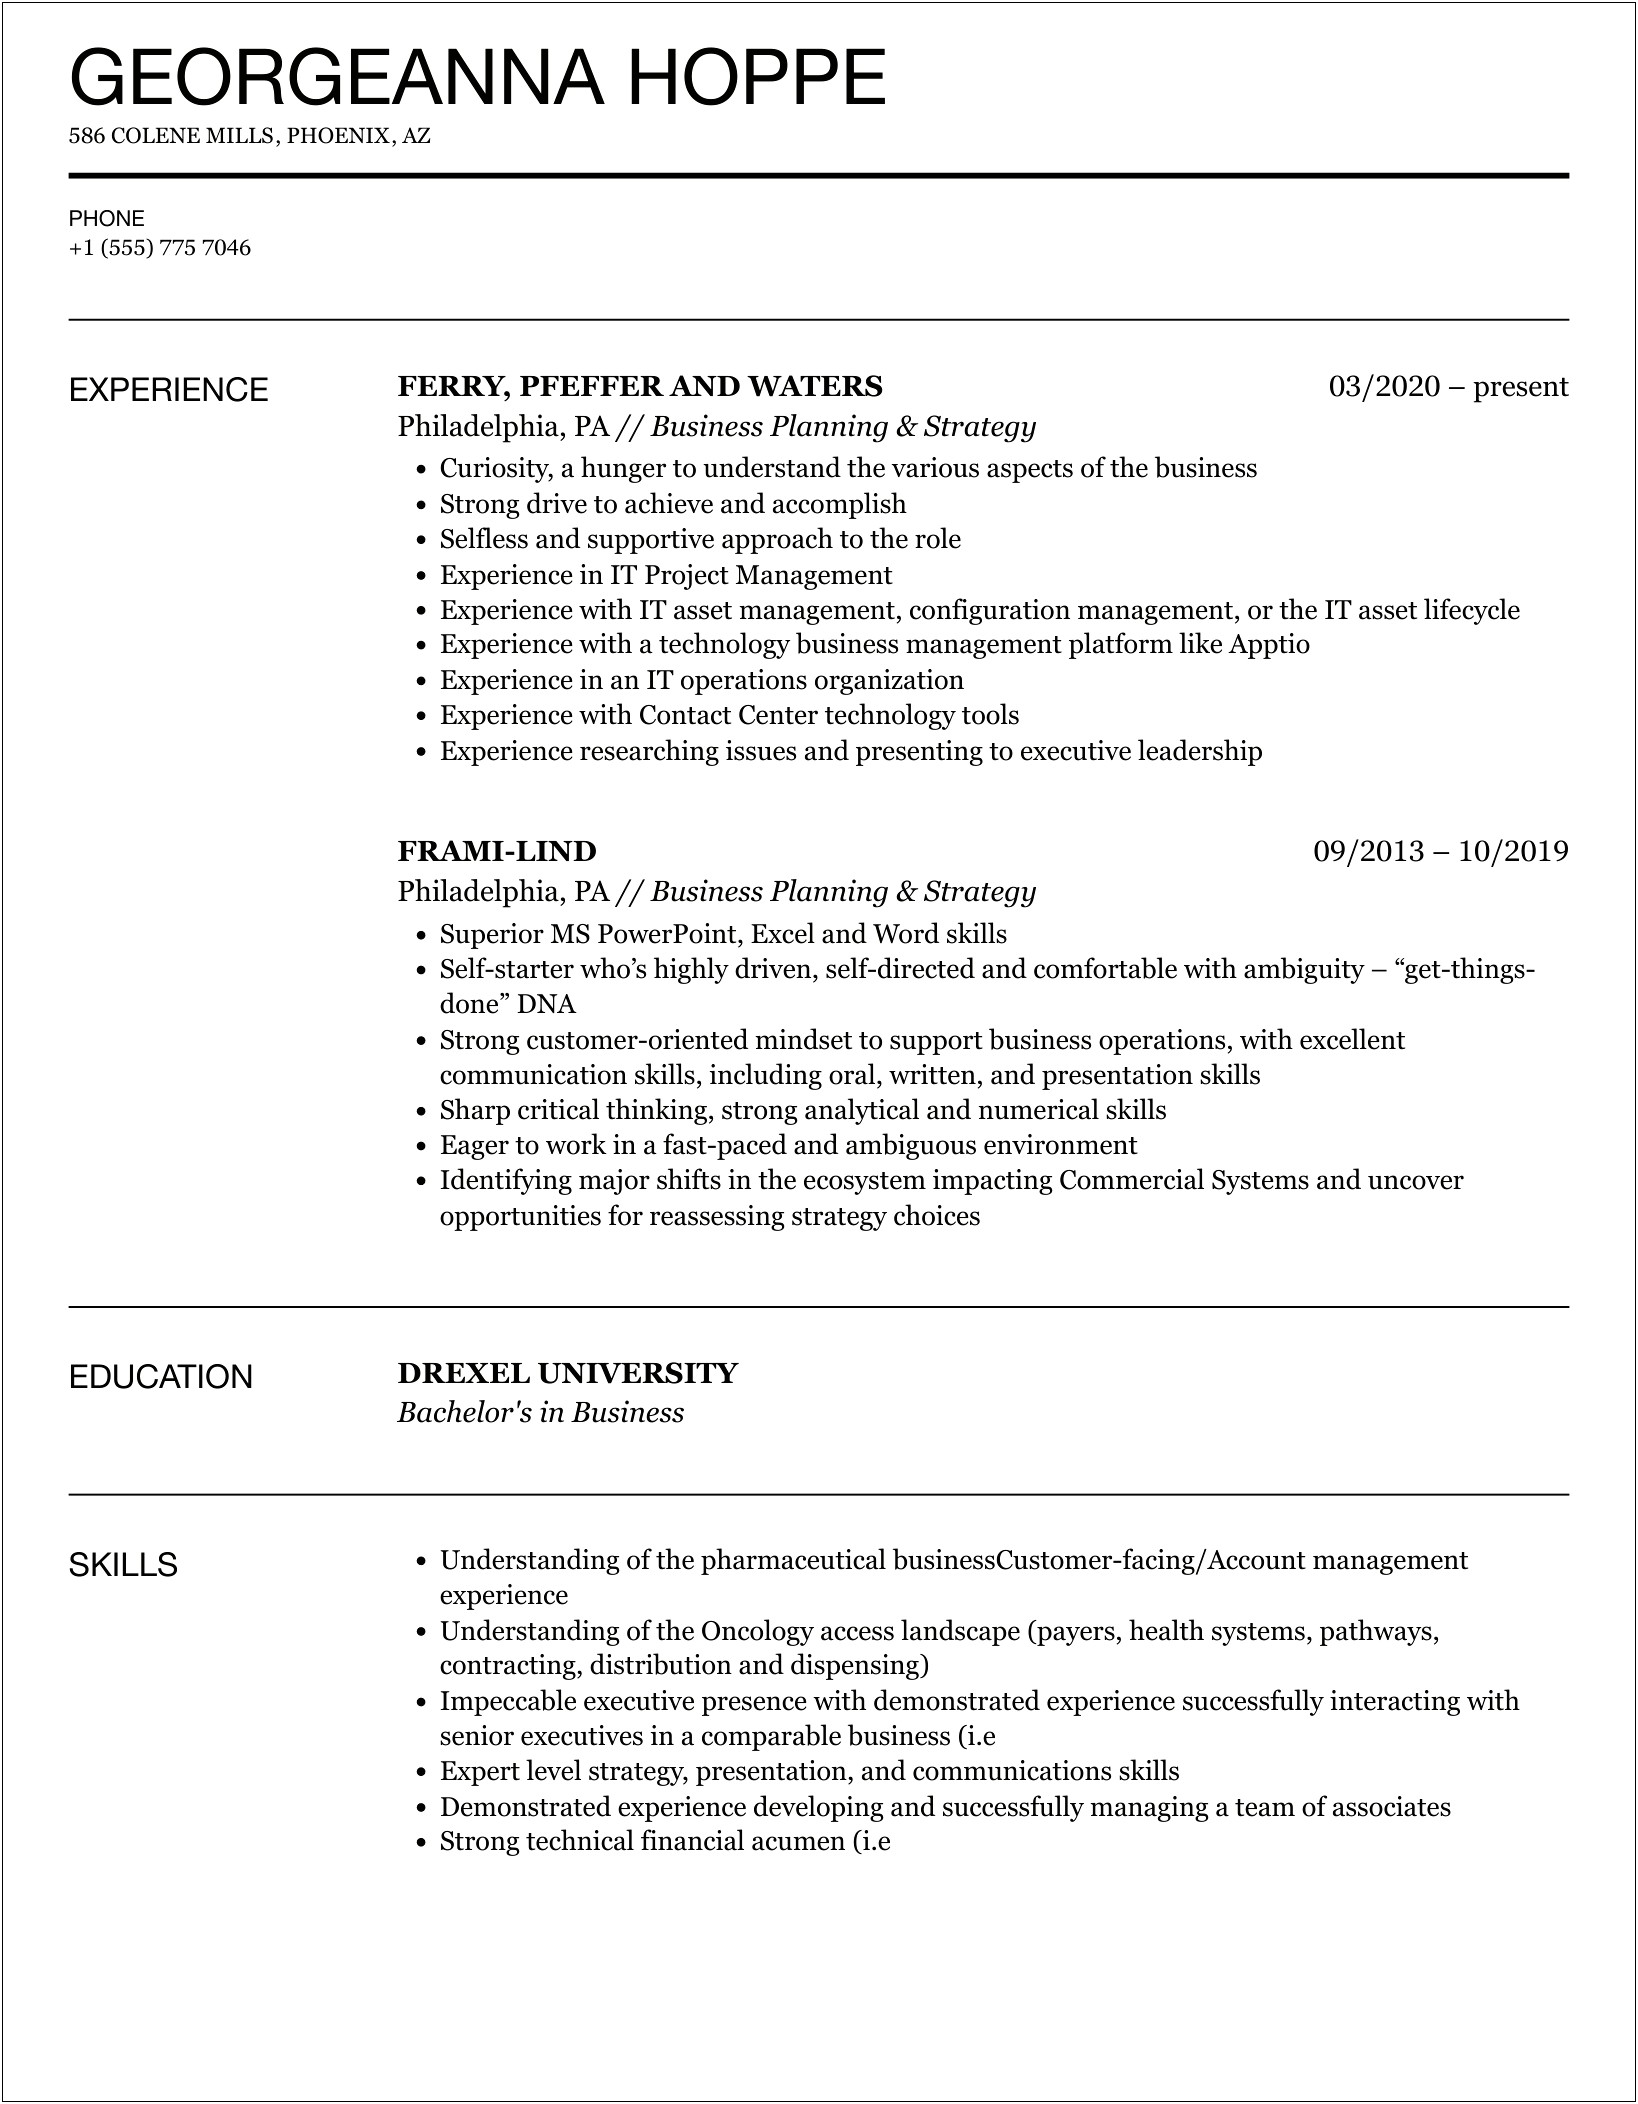 Sample Business Plan For Resume Writing Services